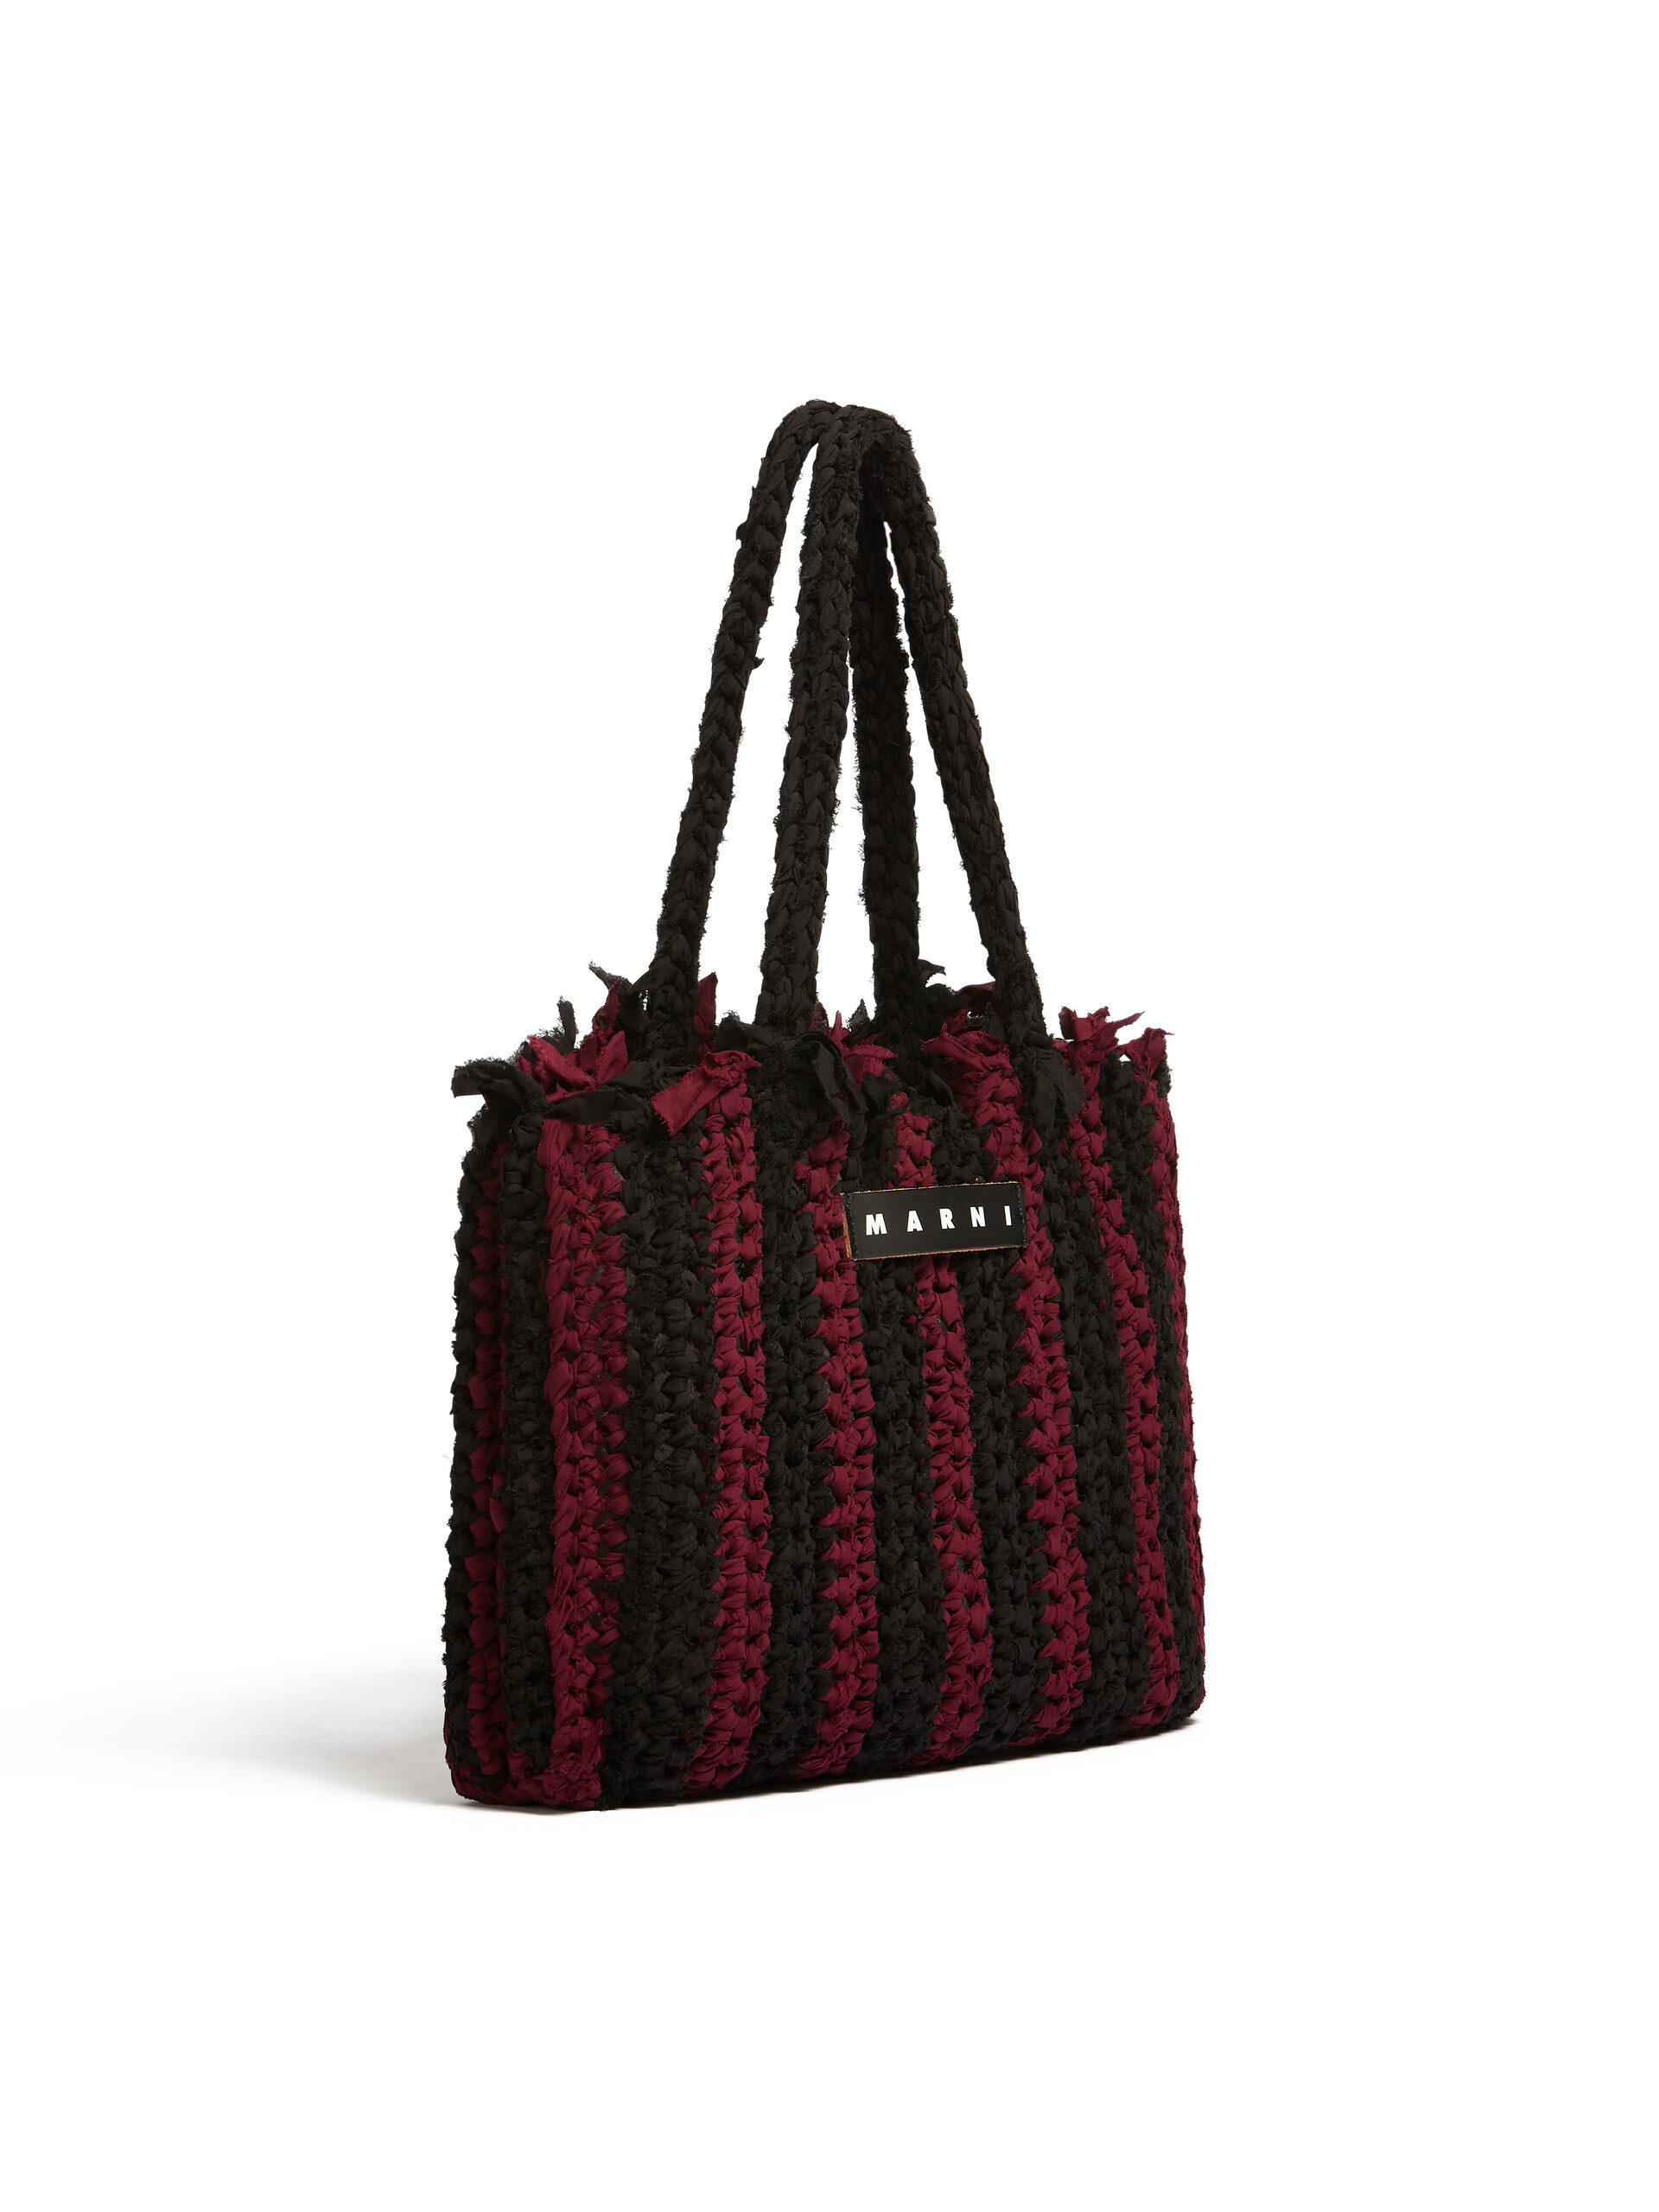 MARNI MARKET bag in black and burgundy cotton - Bags - Image 2